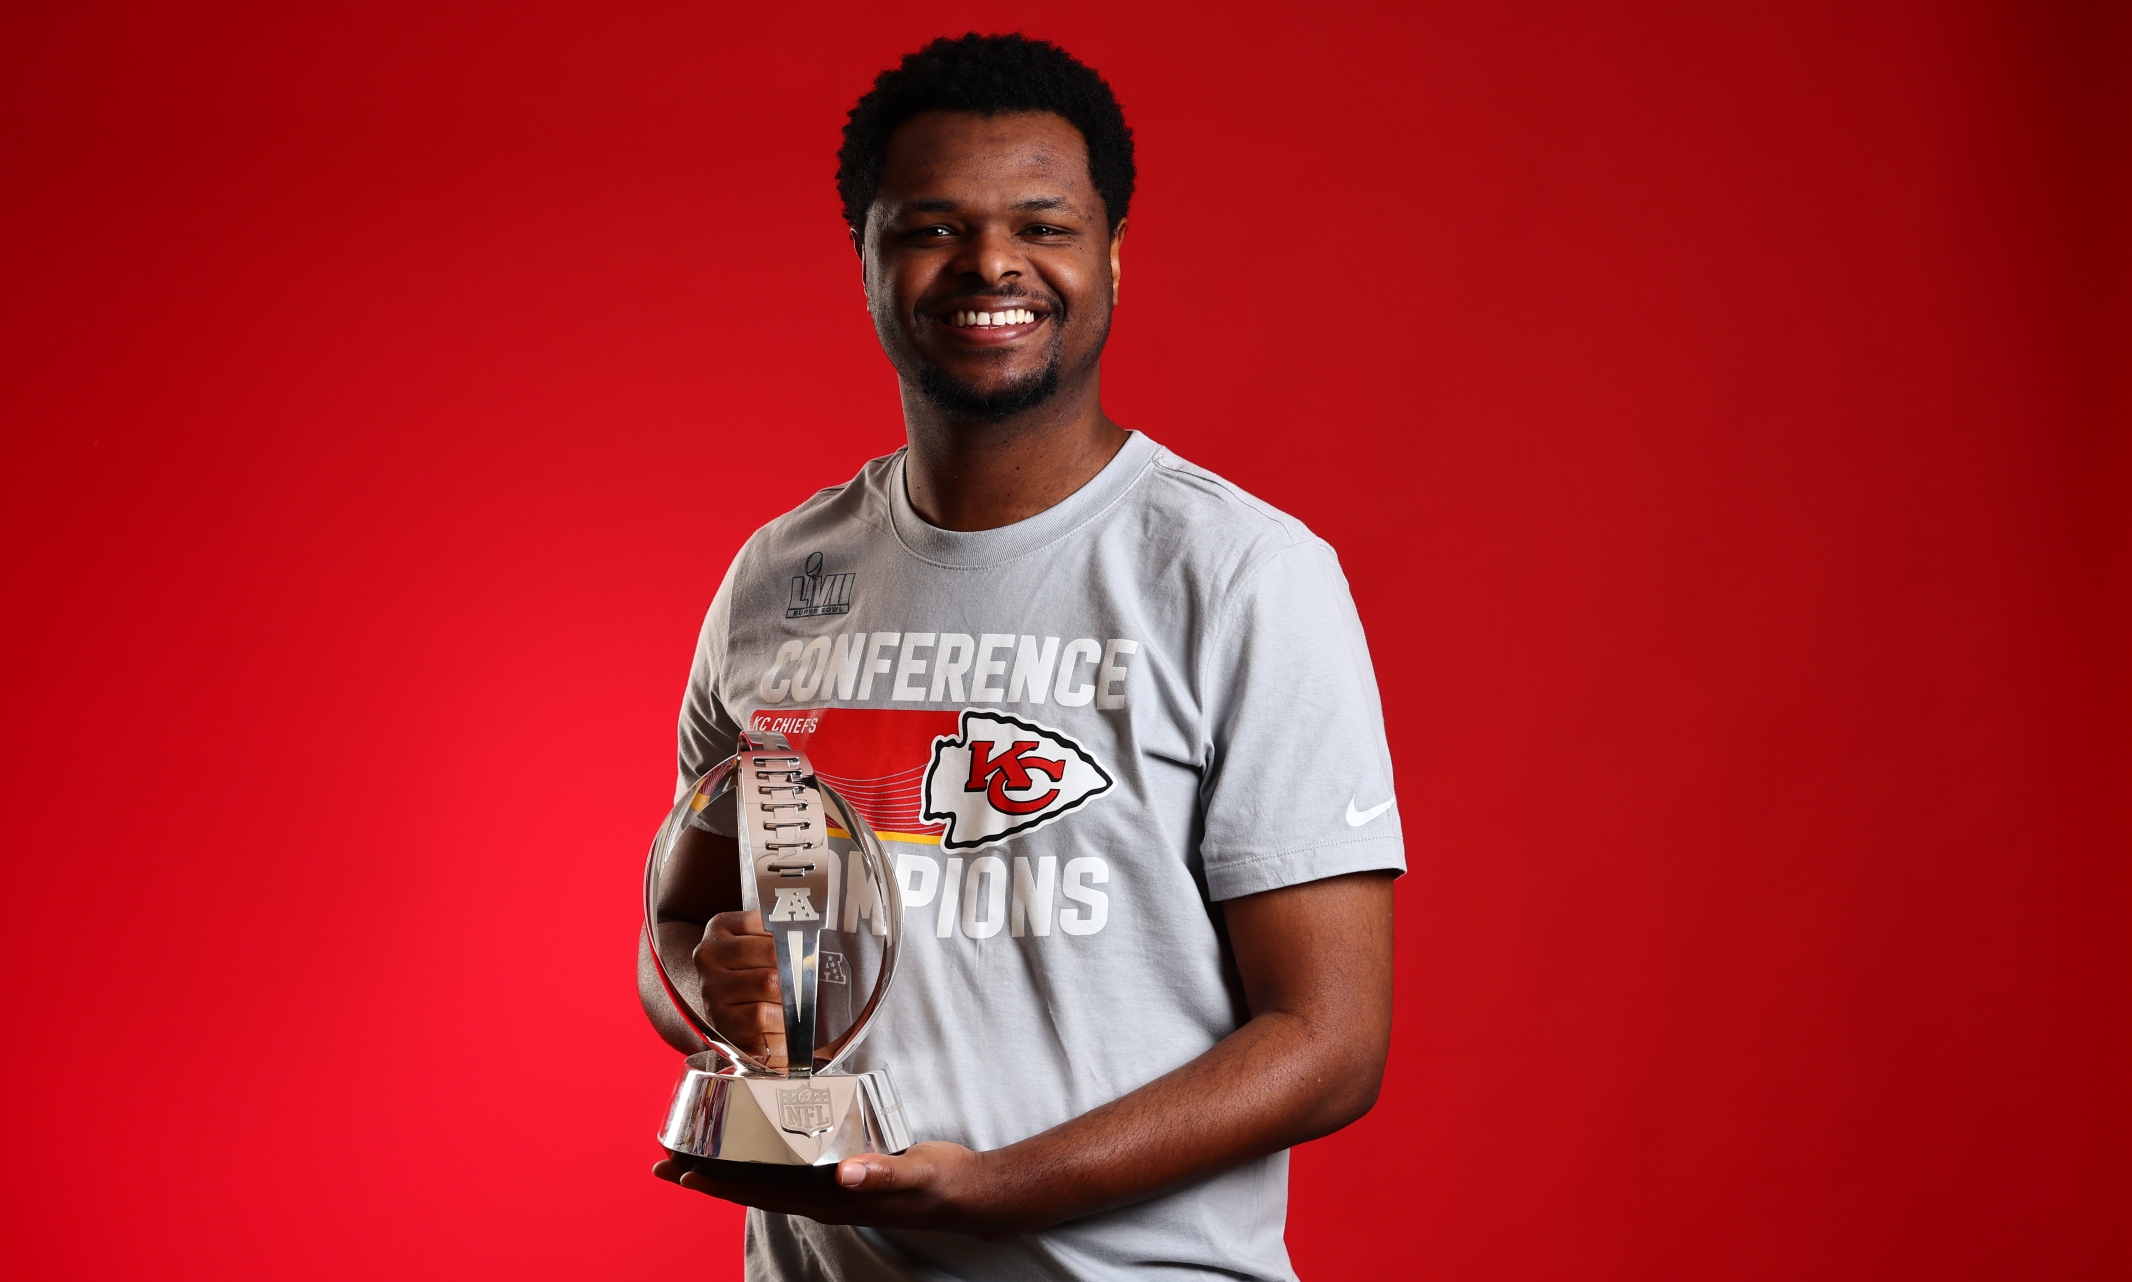 Ishmael Shumate holds the AFC Championship trophy smiling against a red backdrop